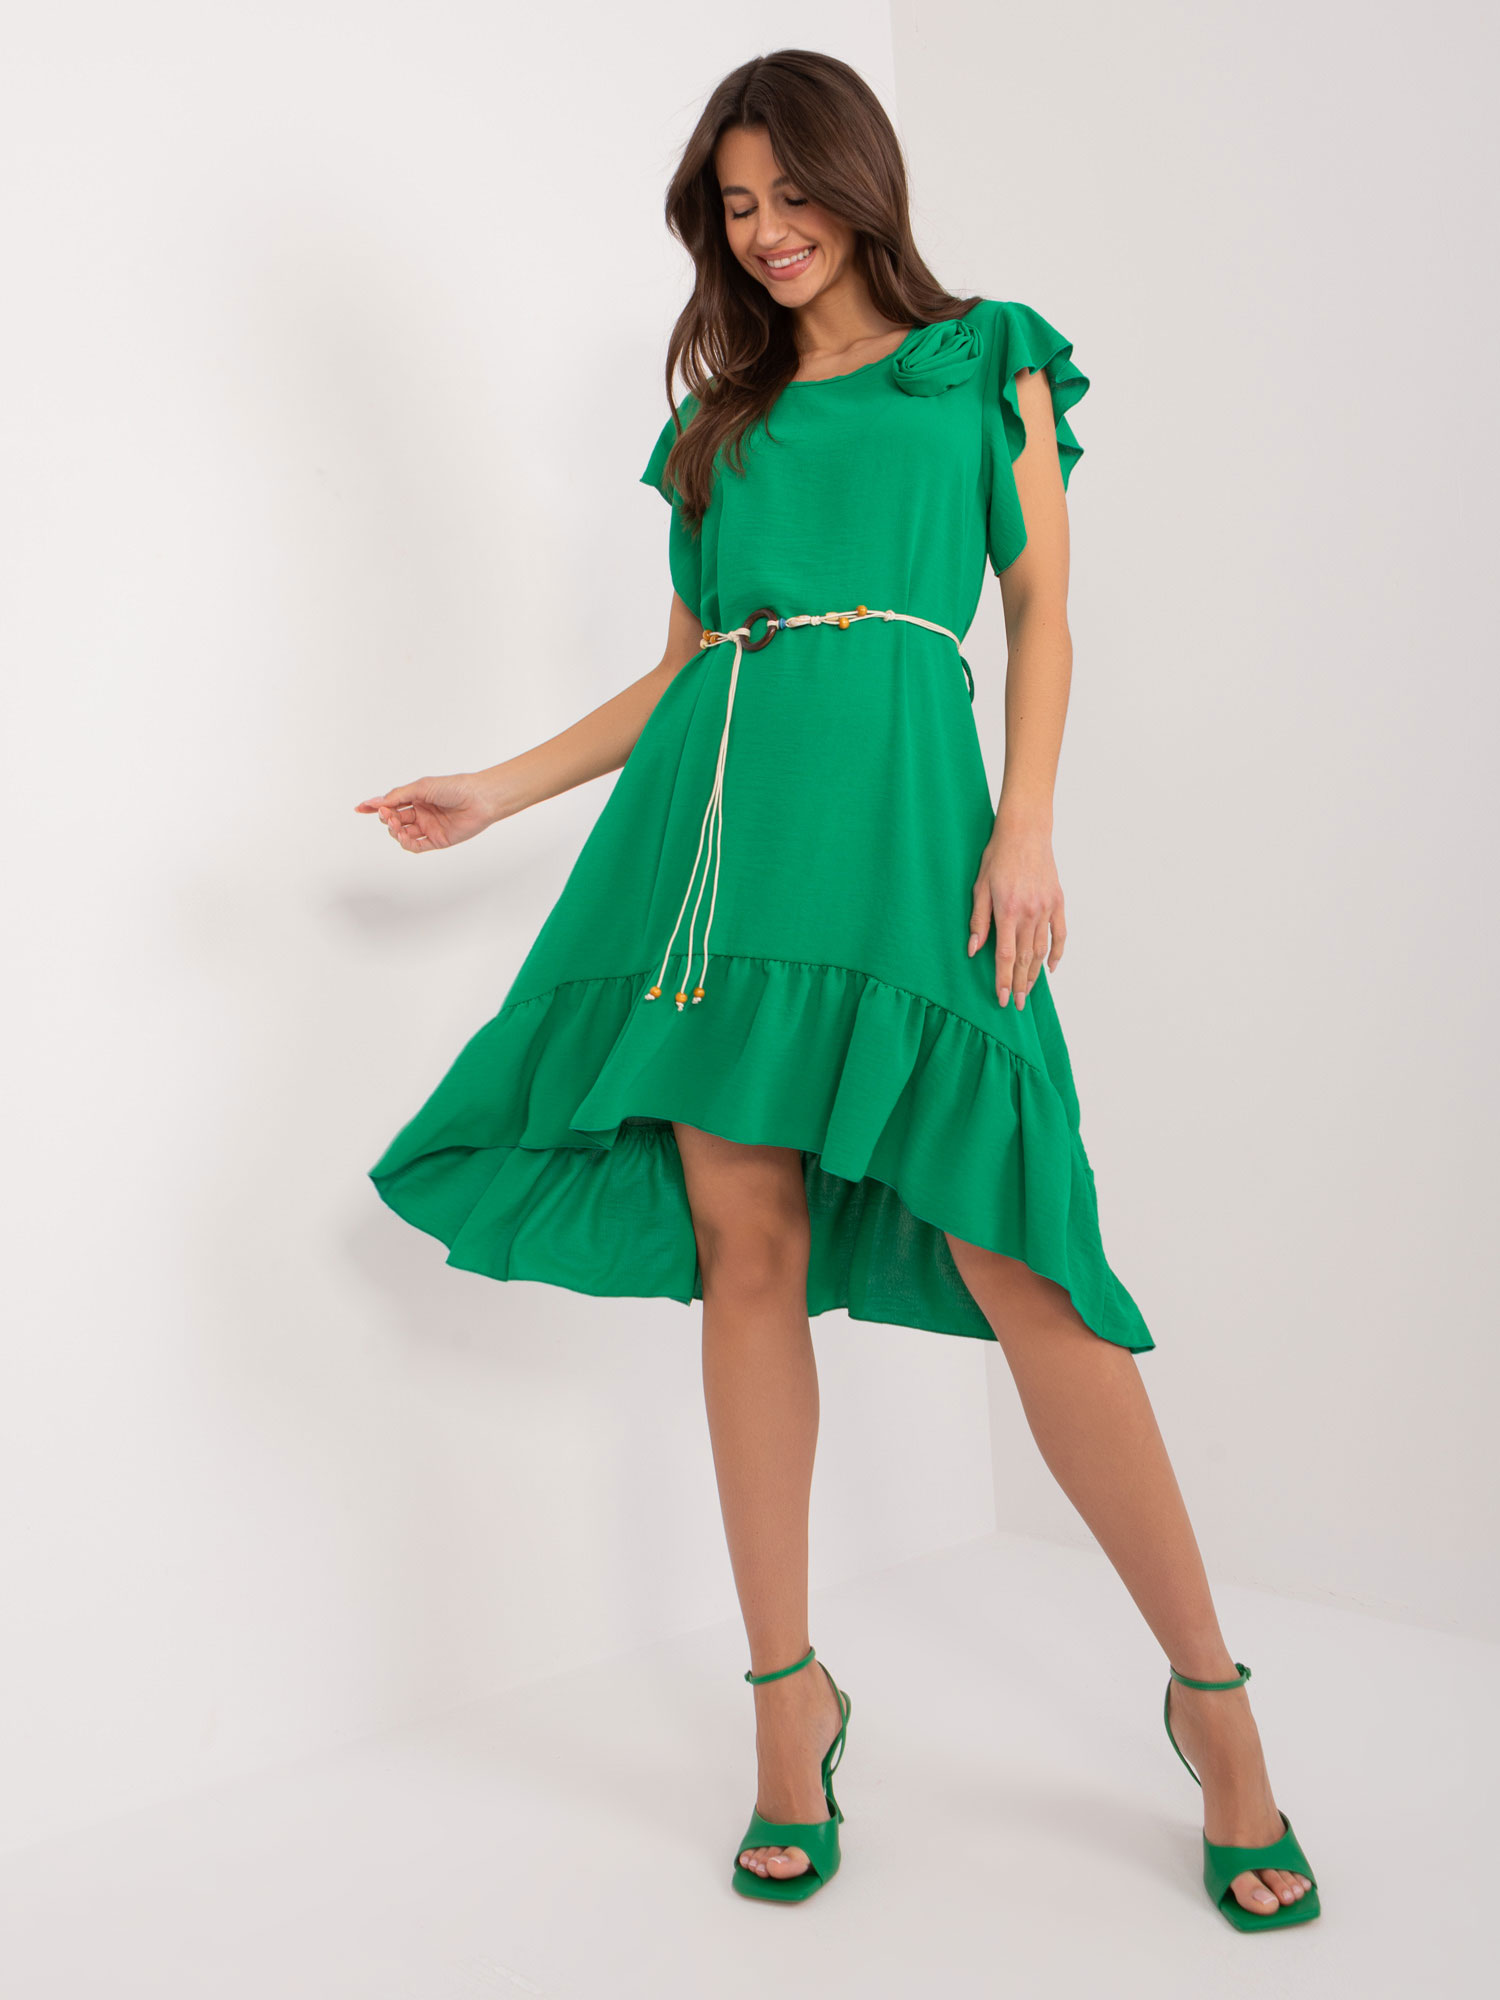 Green dress with ruffles and flower